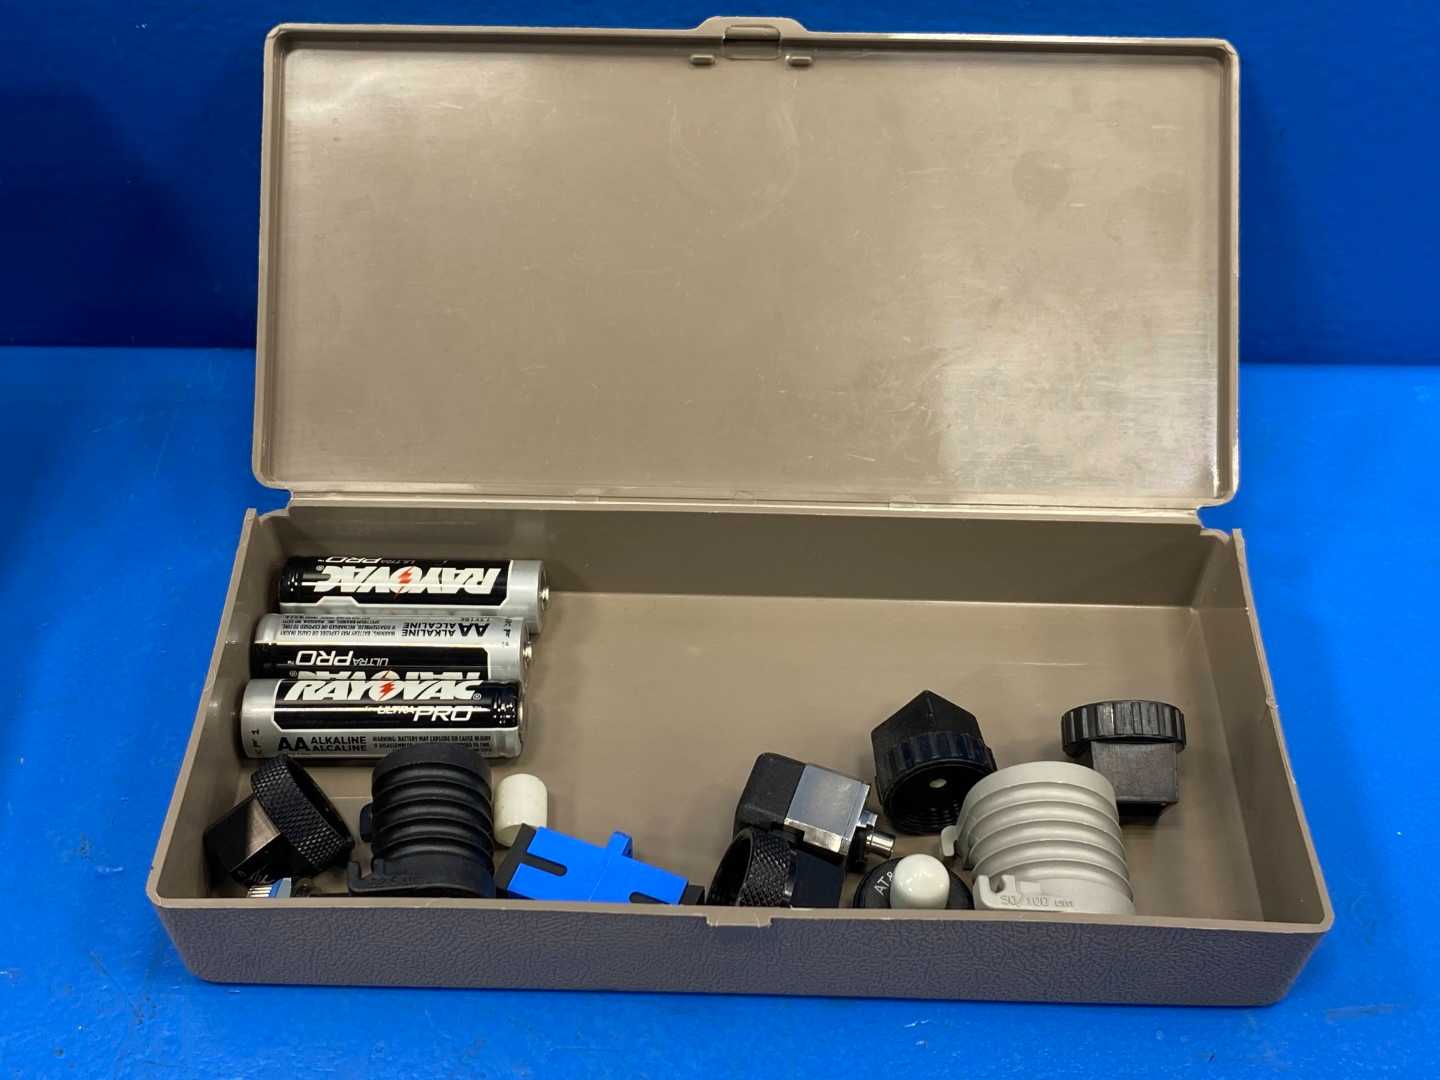 Corning Cable Systems OS-400 OM-400 Series Optical Light Source Testing Meters